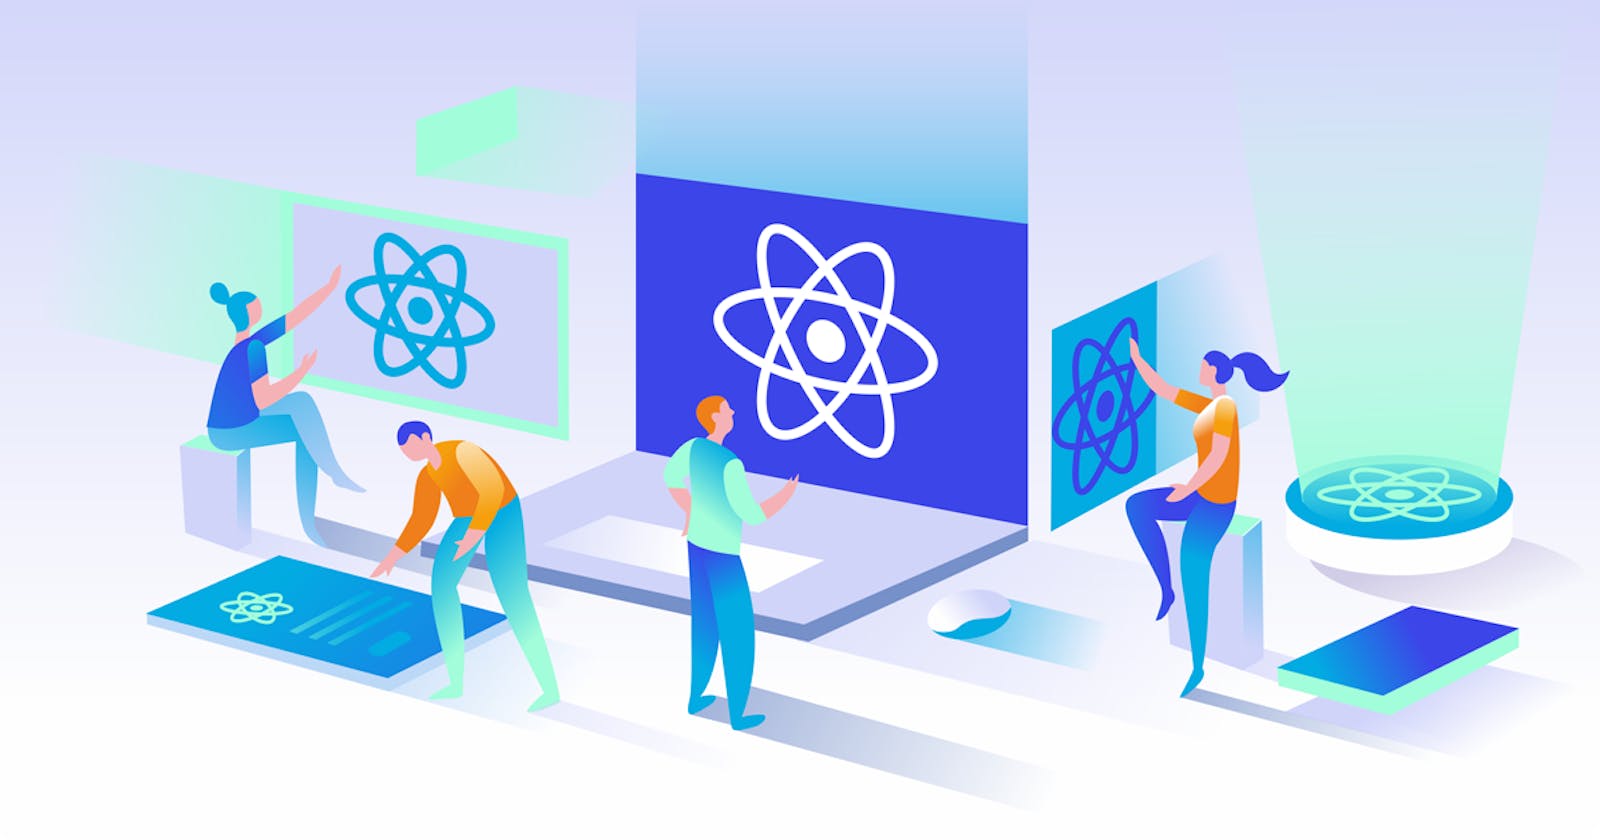 All You Need to Know About ReactJS